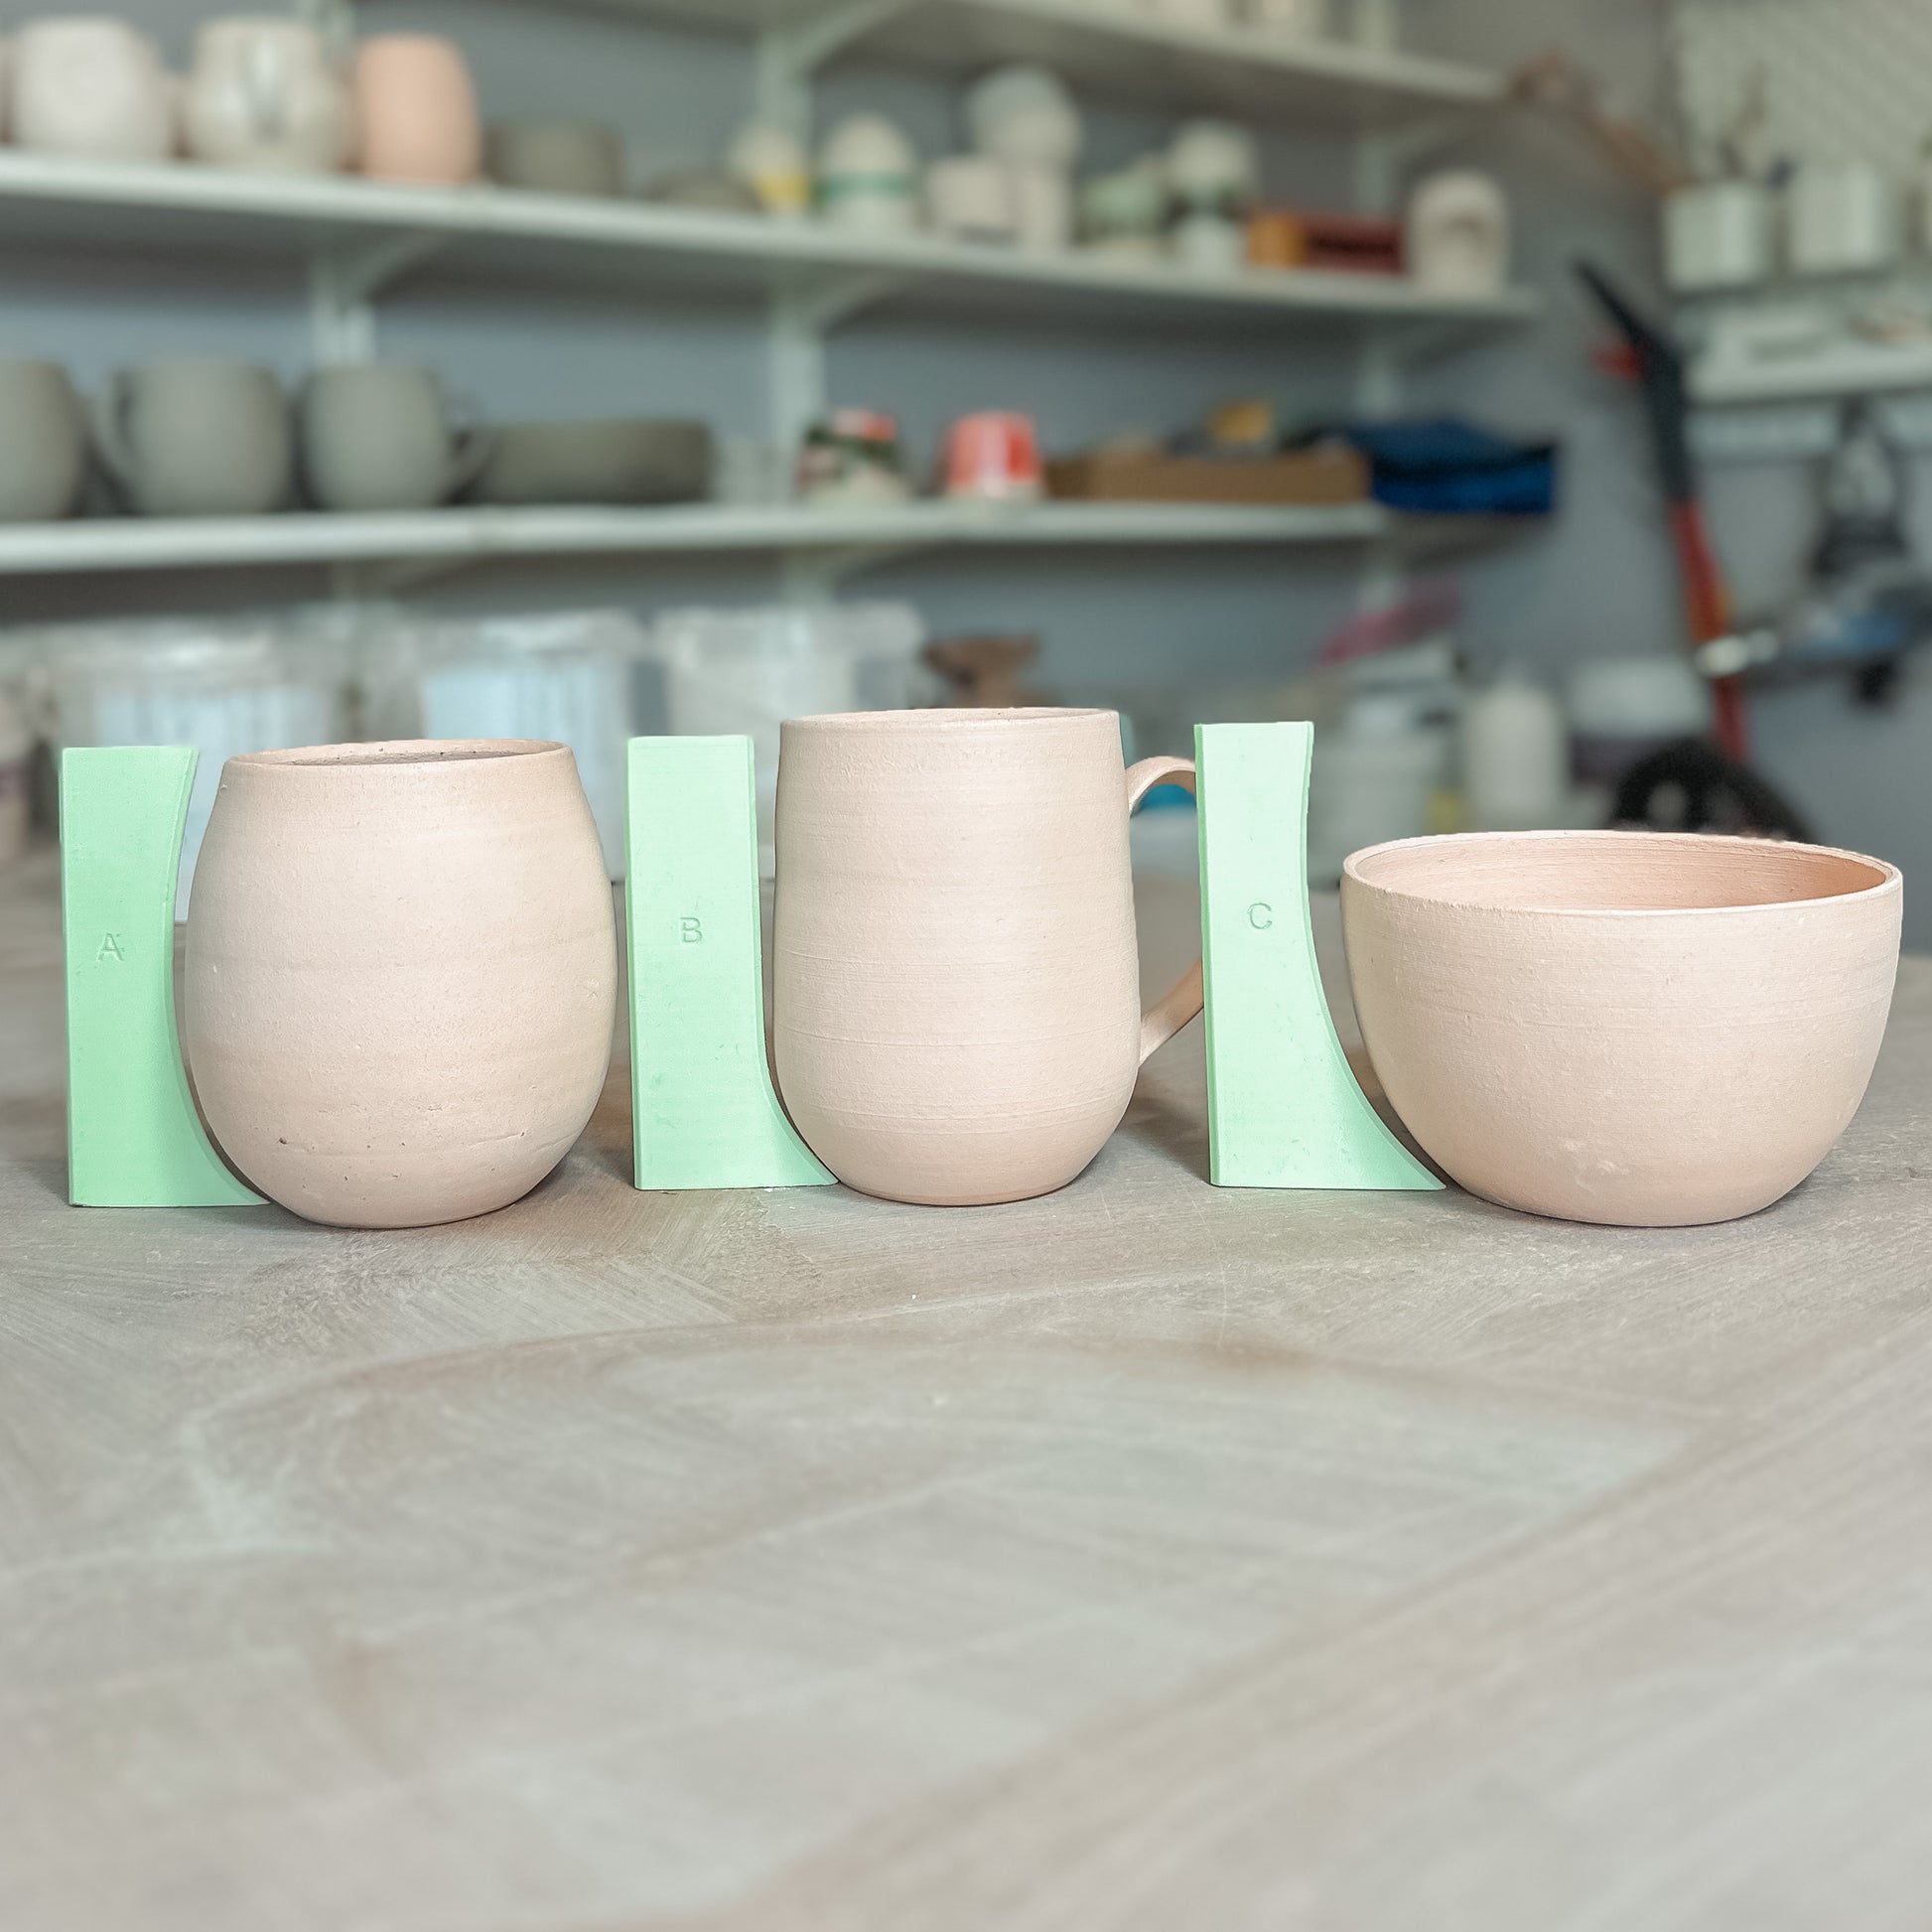 Ribs for the pottery studio - The Ceramic Shop